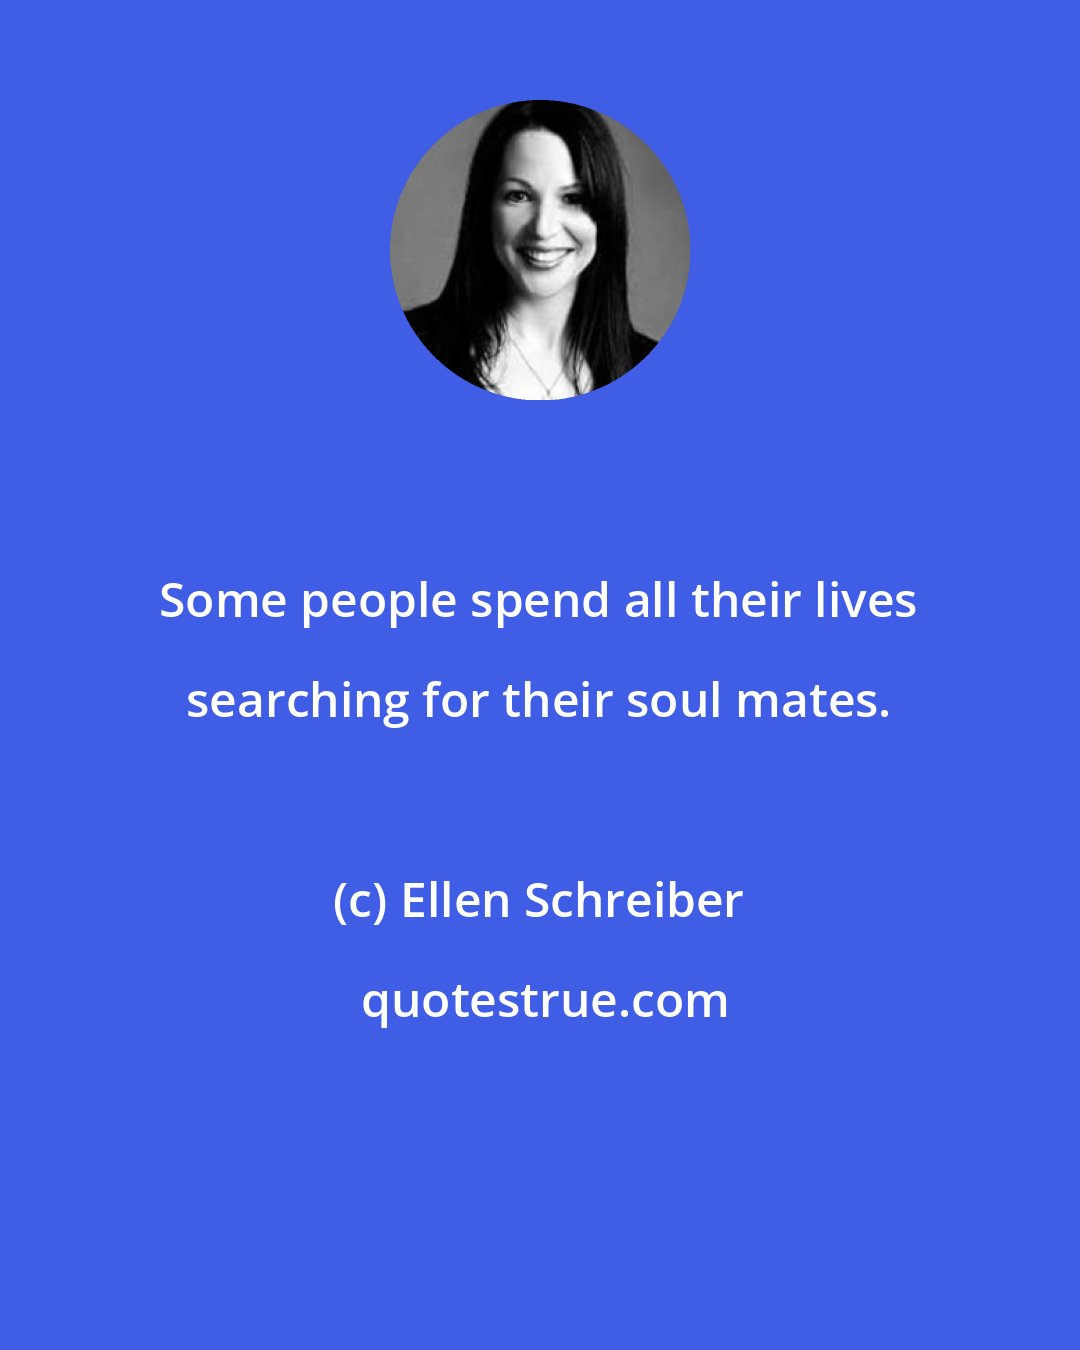 Ellen Schreiber: Some people spend all their lives searching for their soul mates.